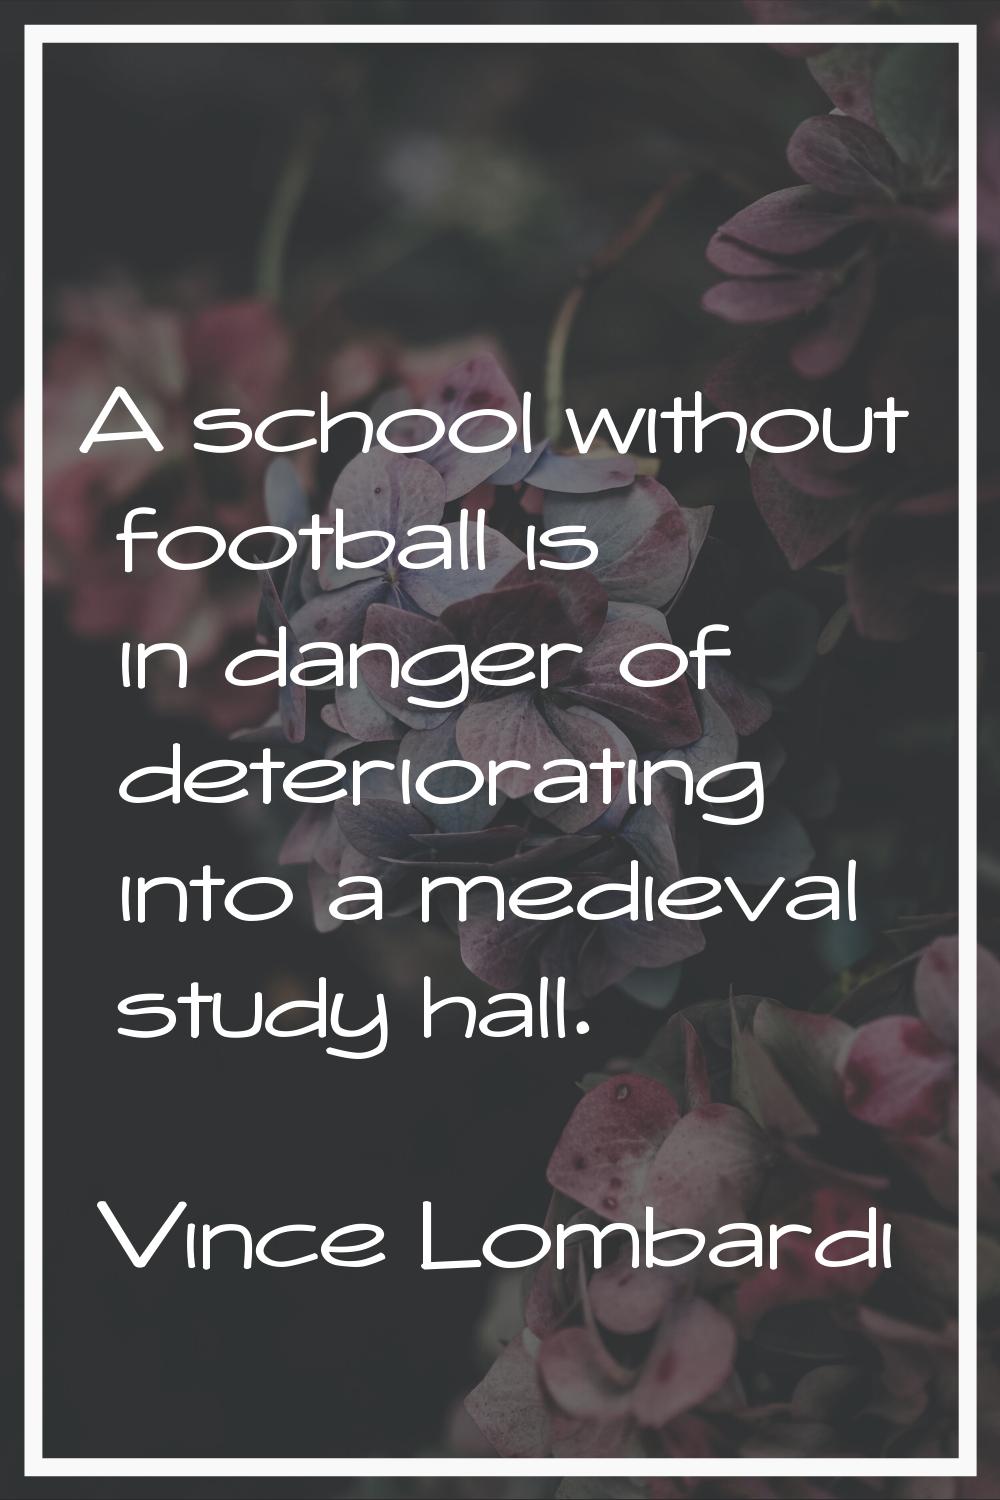 A school without football is in danger of deteriorating into a medieval study hall.